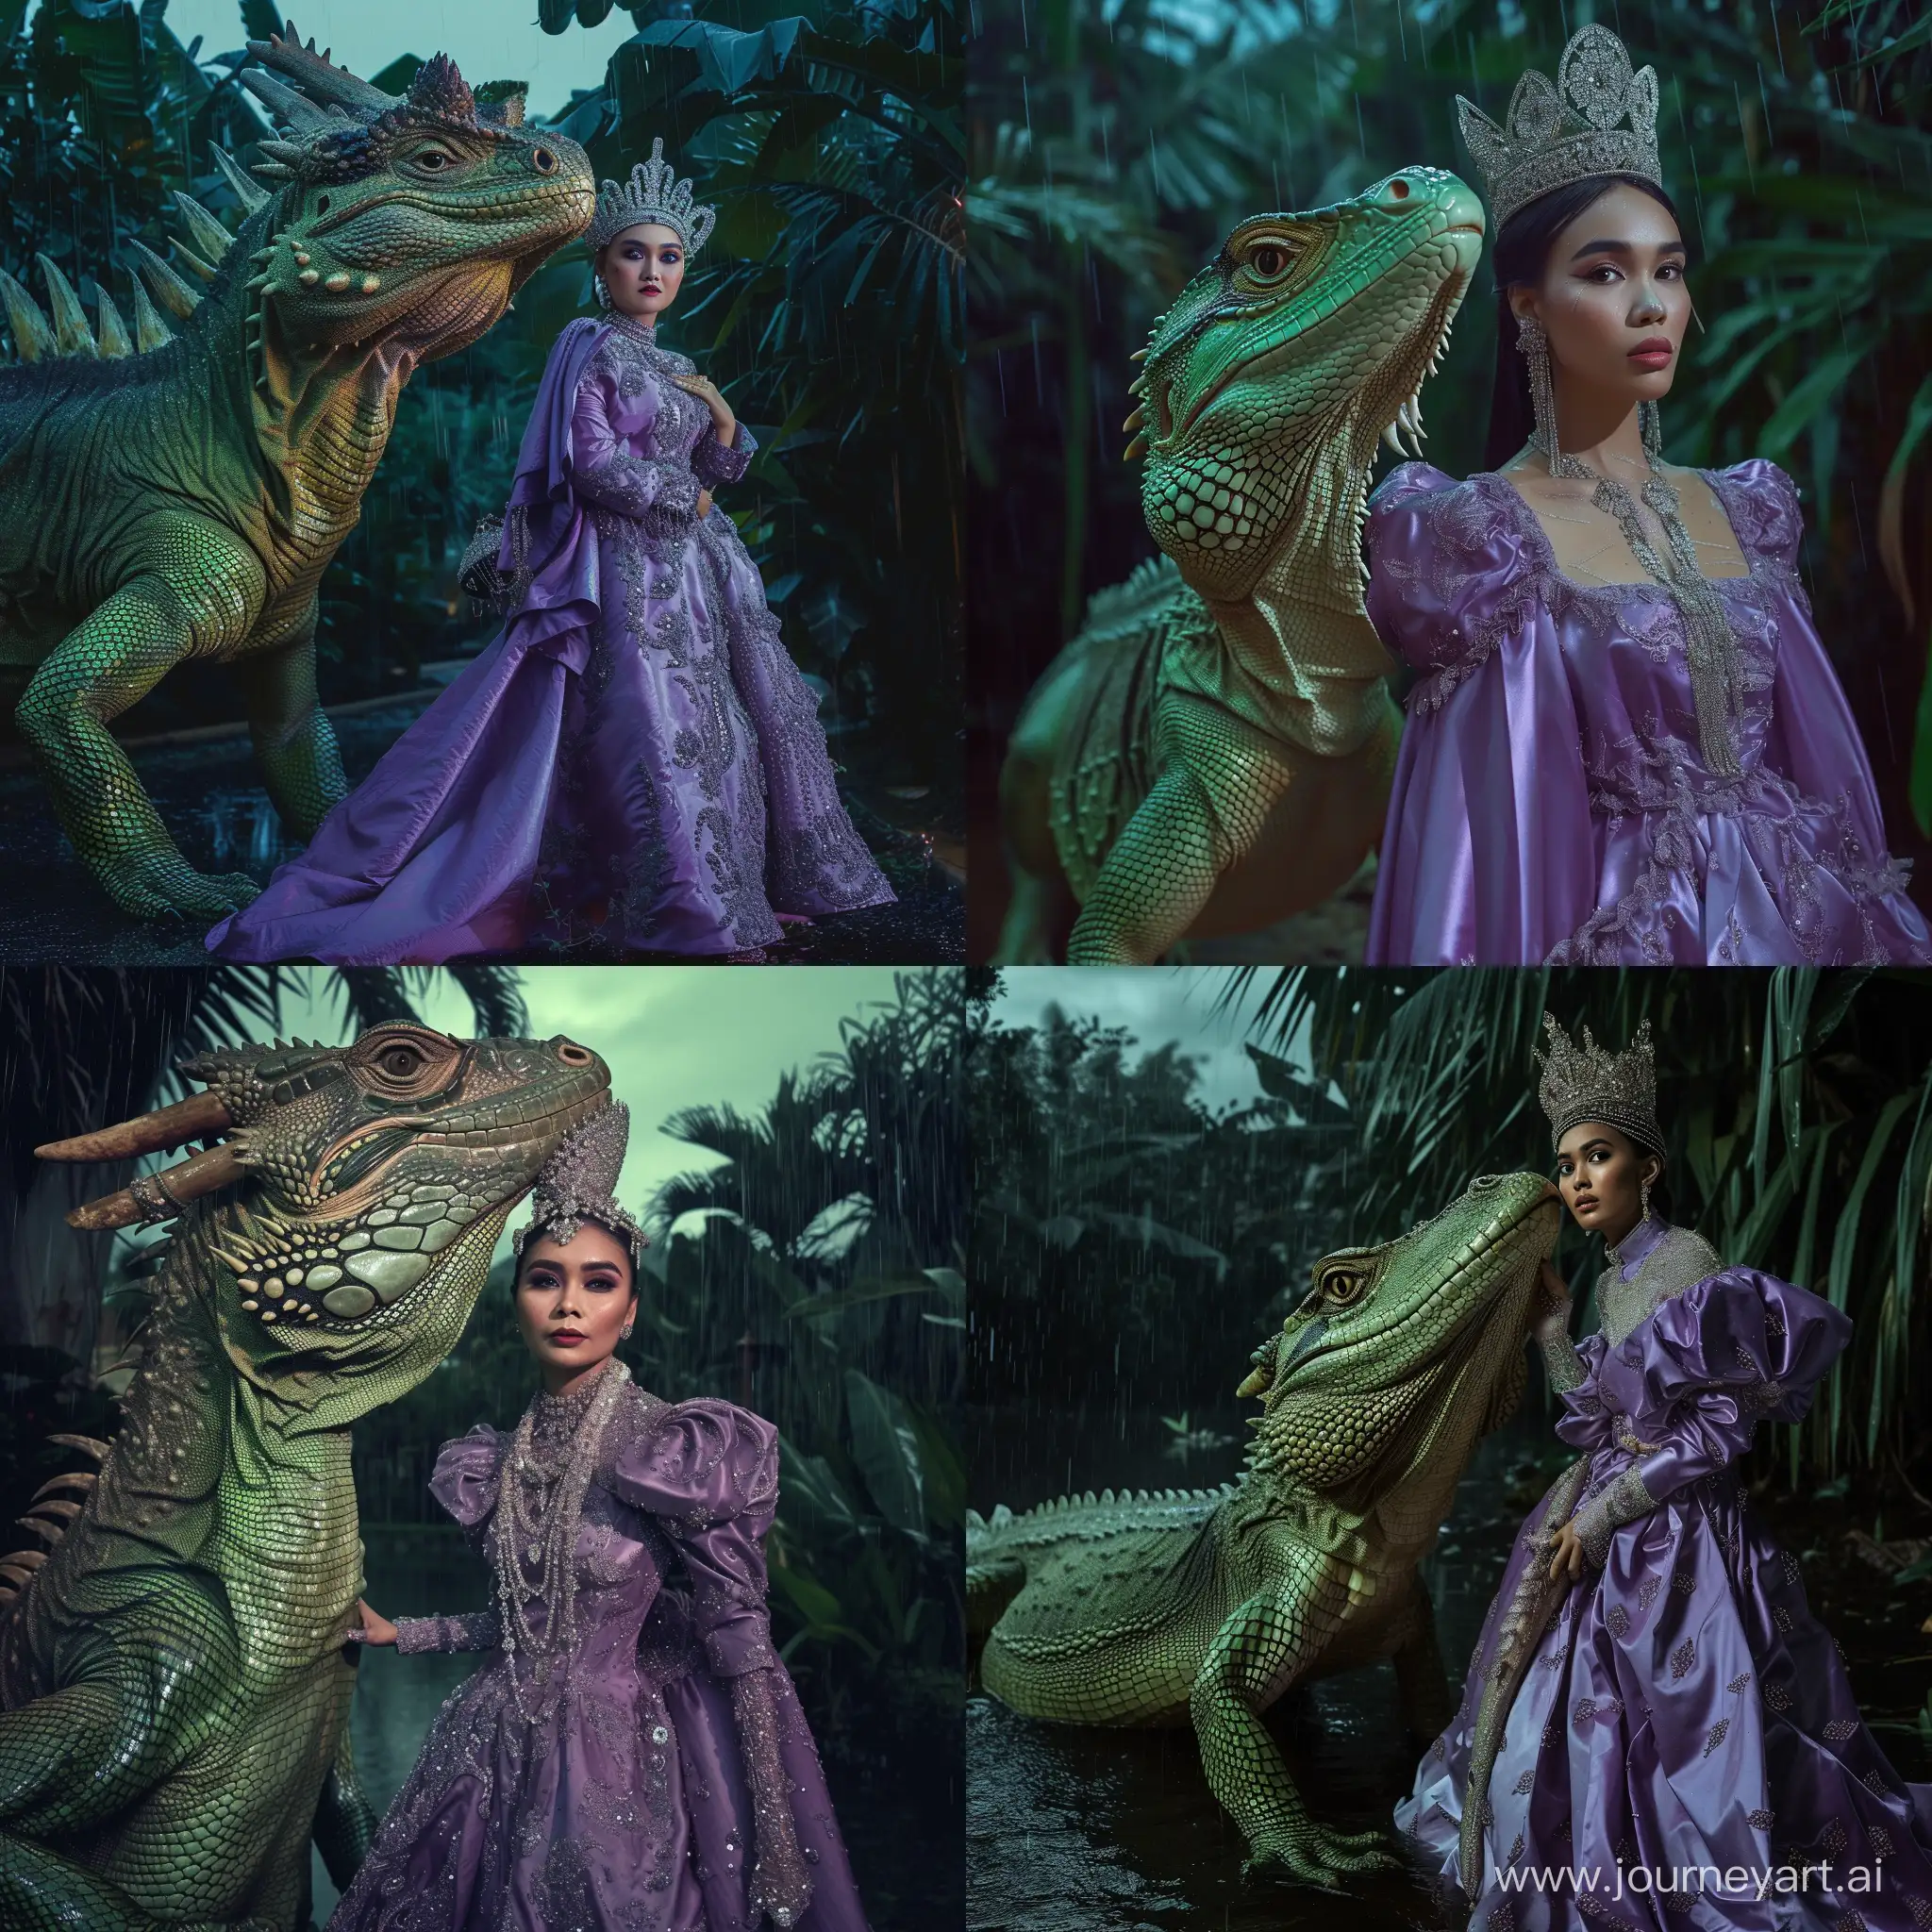 Eccentric-Sundanese-Queen-and-Giant-Green-Dragon-in-Enchanted-Forest